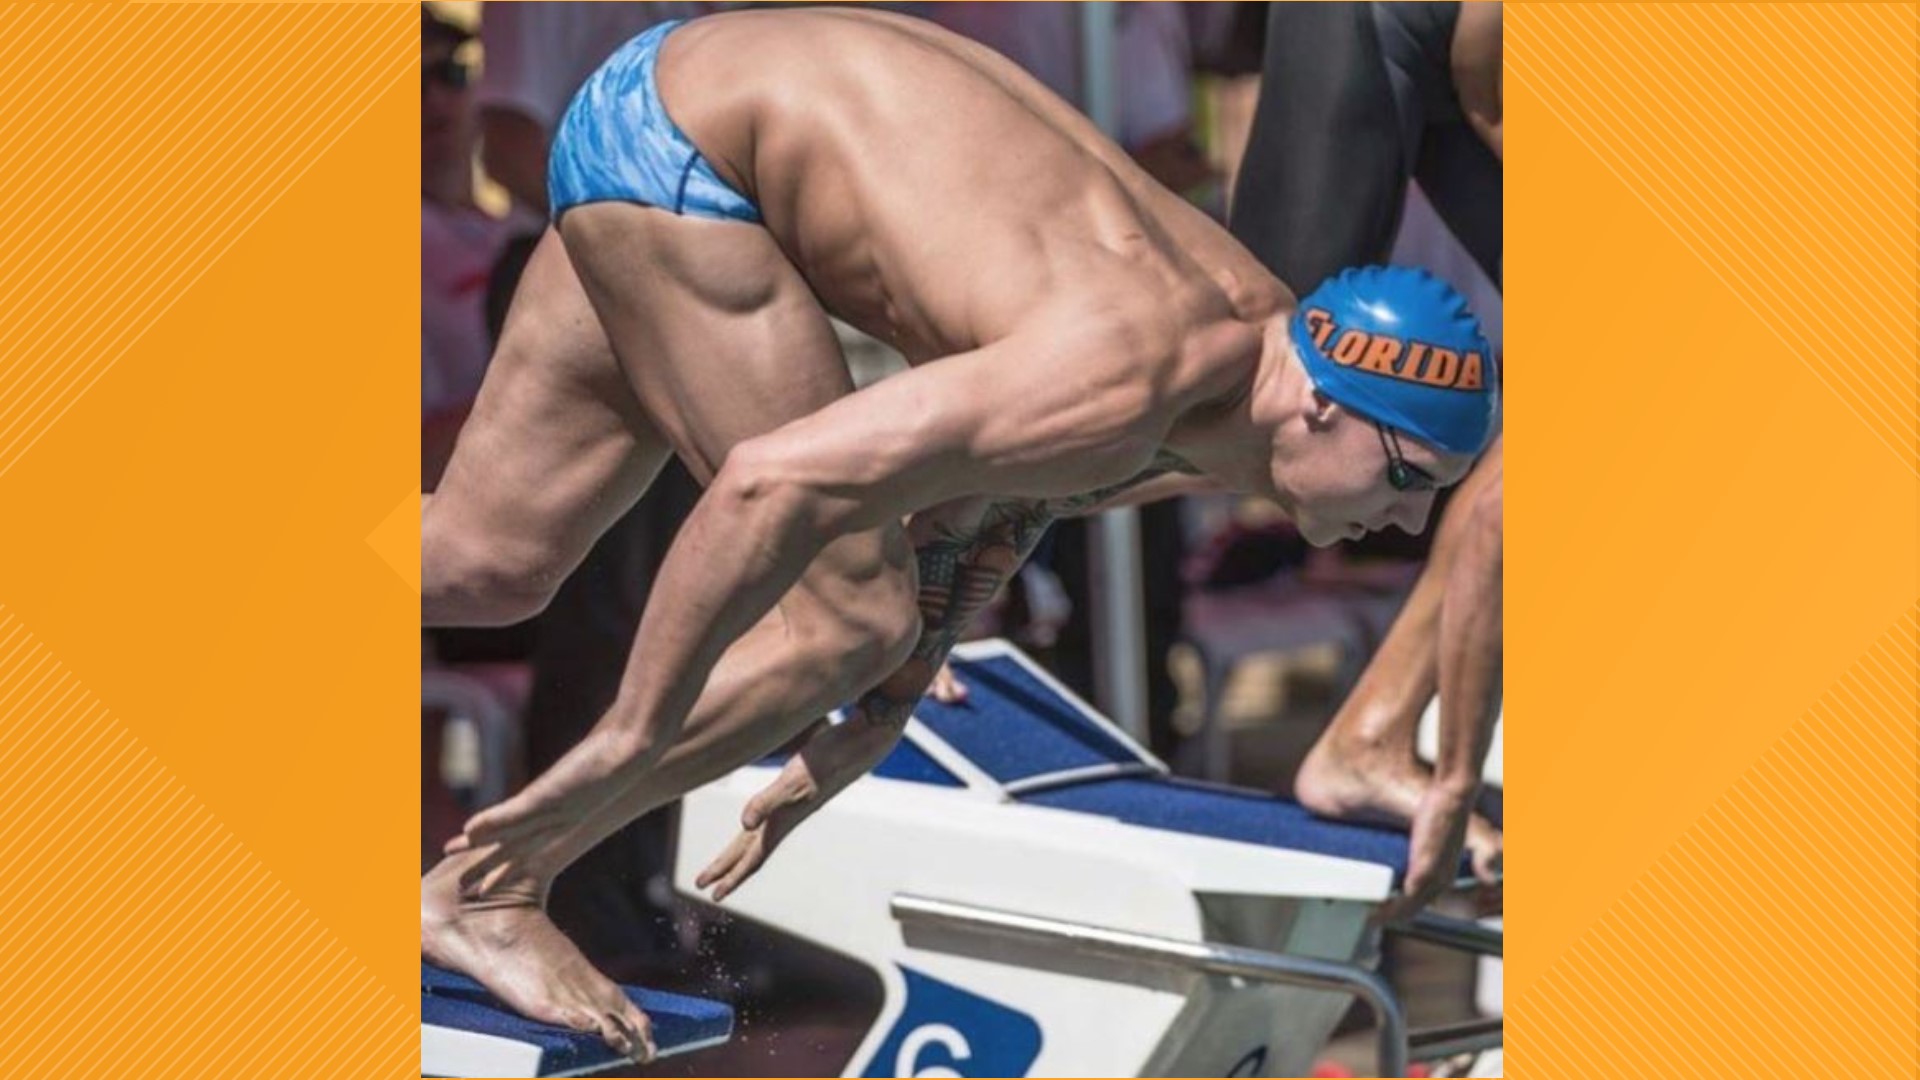 He's already smashing records, including a world record of Michael Phelps.